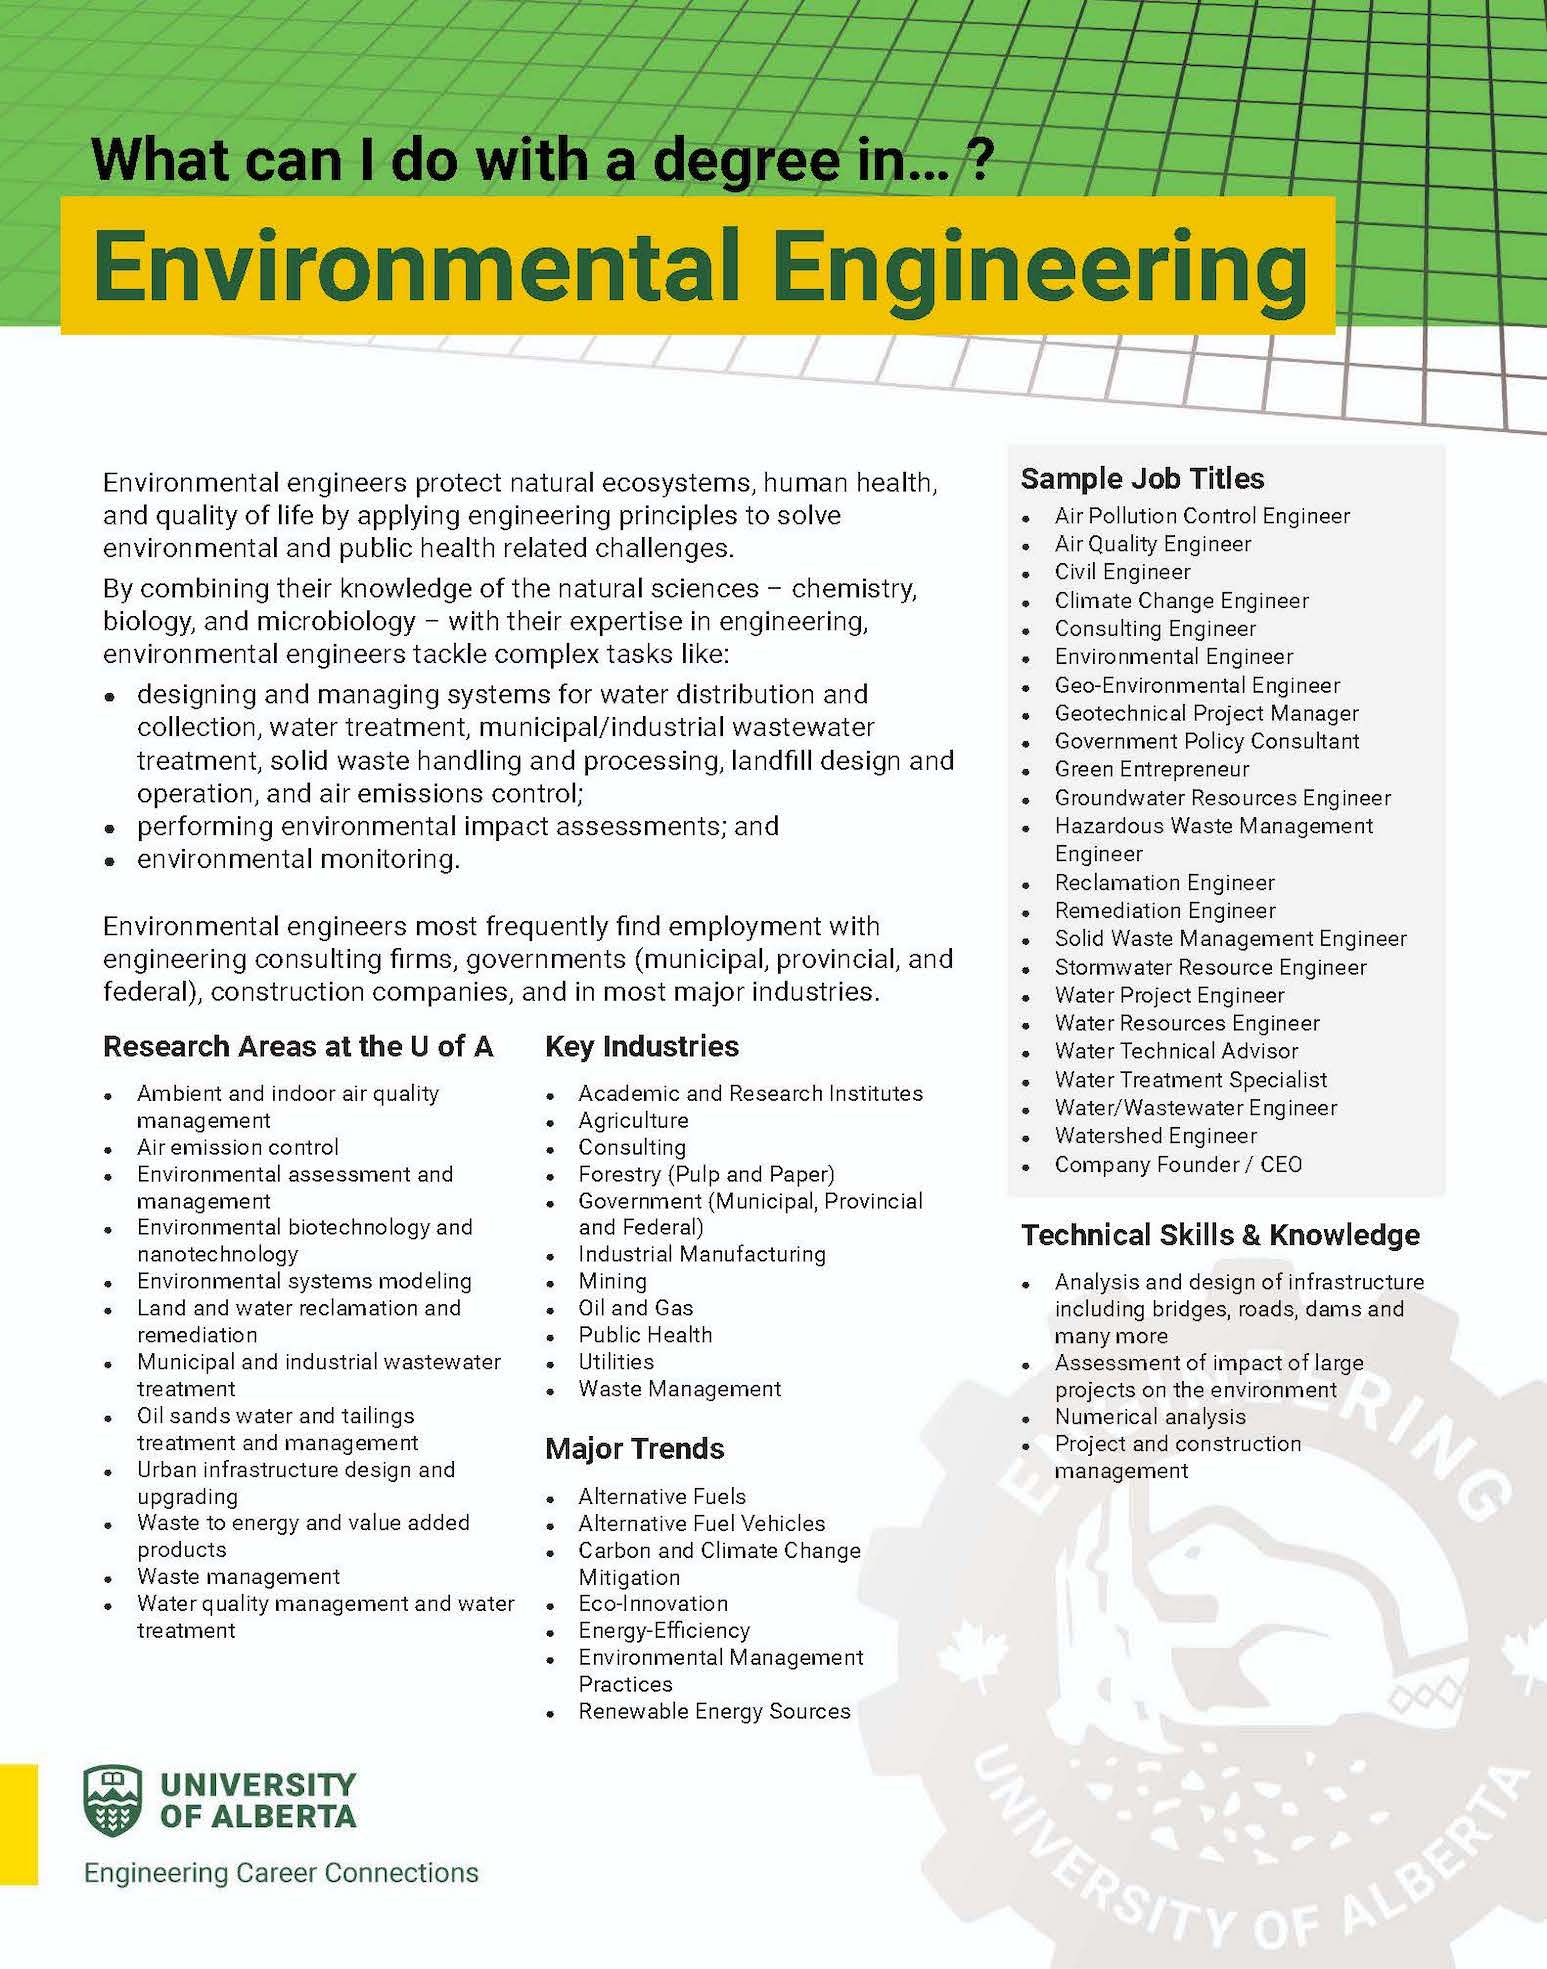 Screenshot of the "What Can I Do With A Degree in Environmental Engineering?” Handout. The image links to the handout.